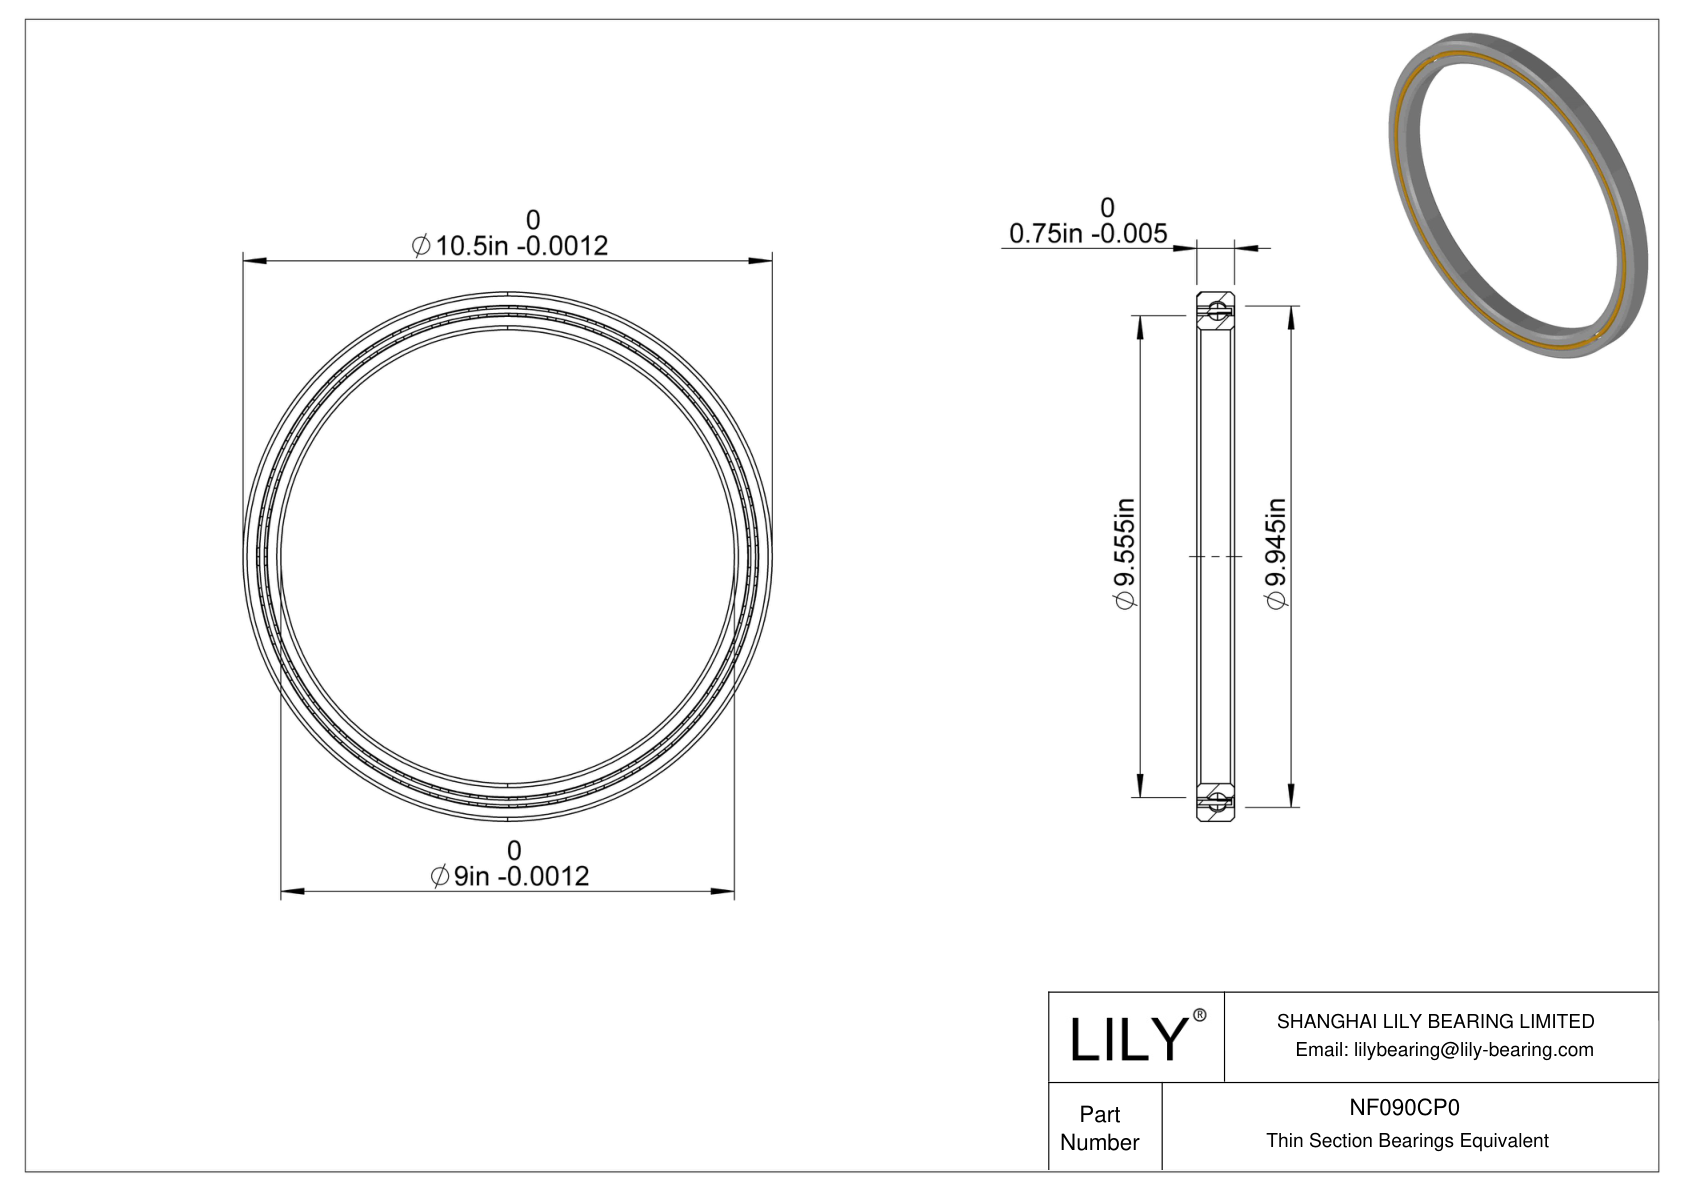 NF090CP0 Constant Section (CS) Bearings cad drawing